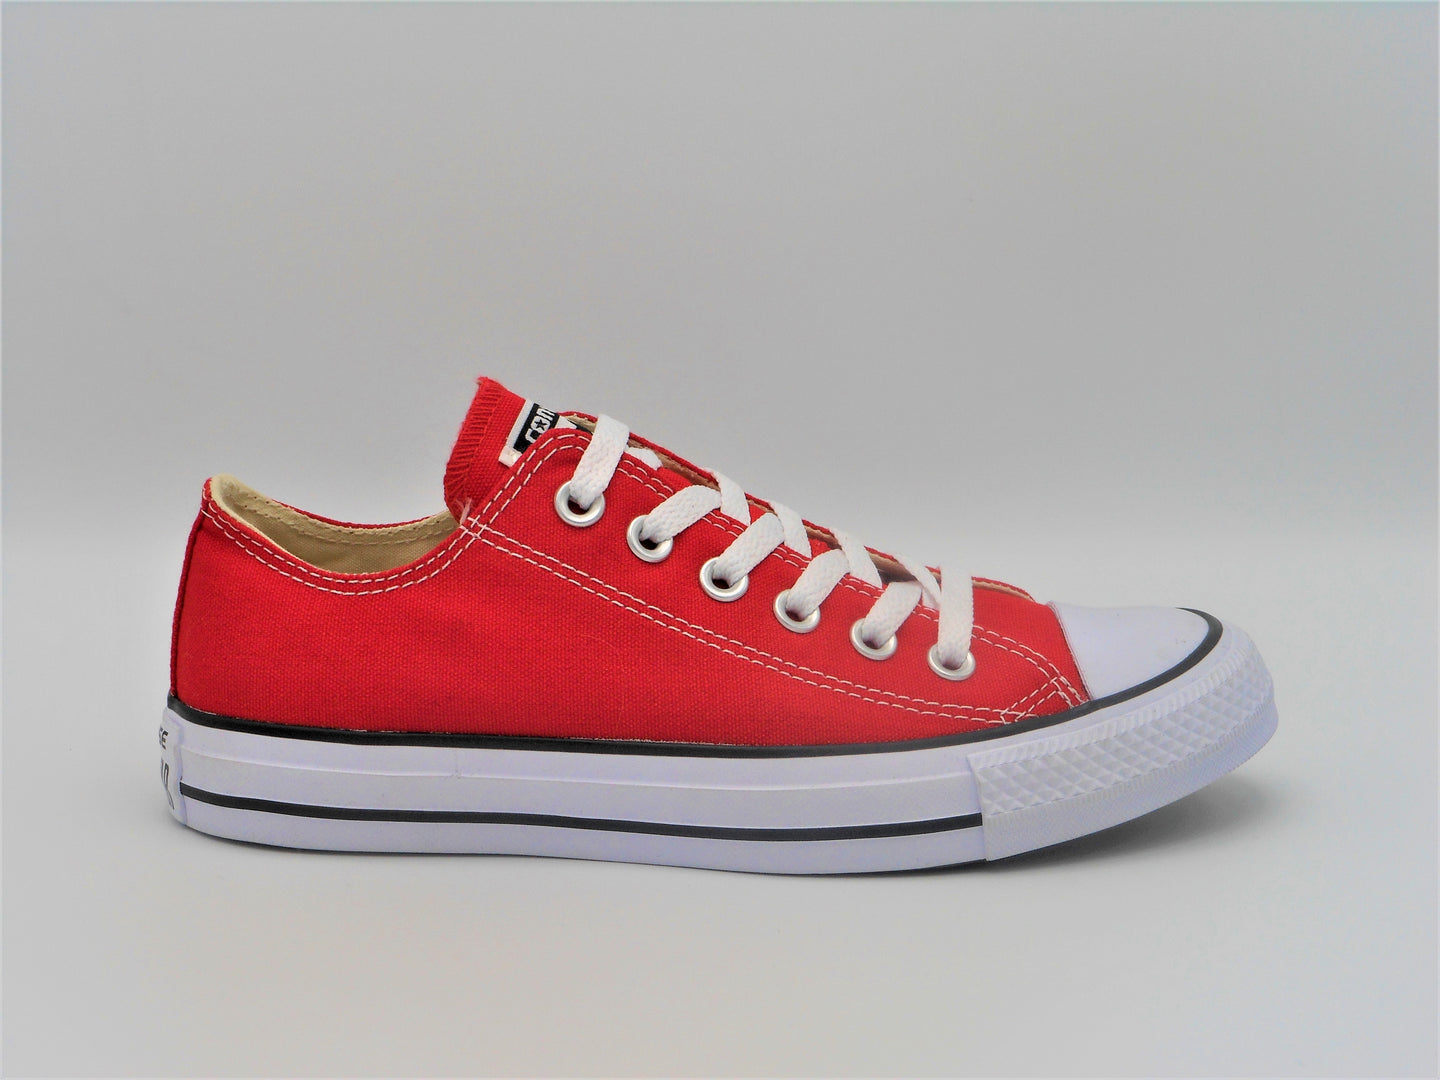 CONVERSE All Star Ox red